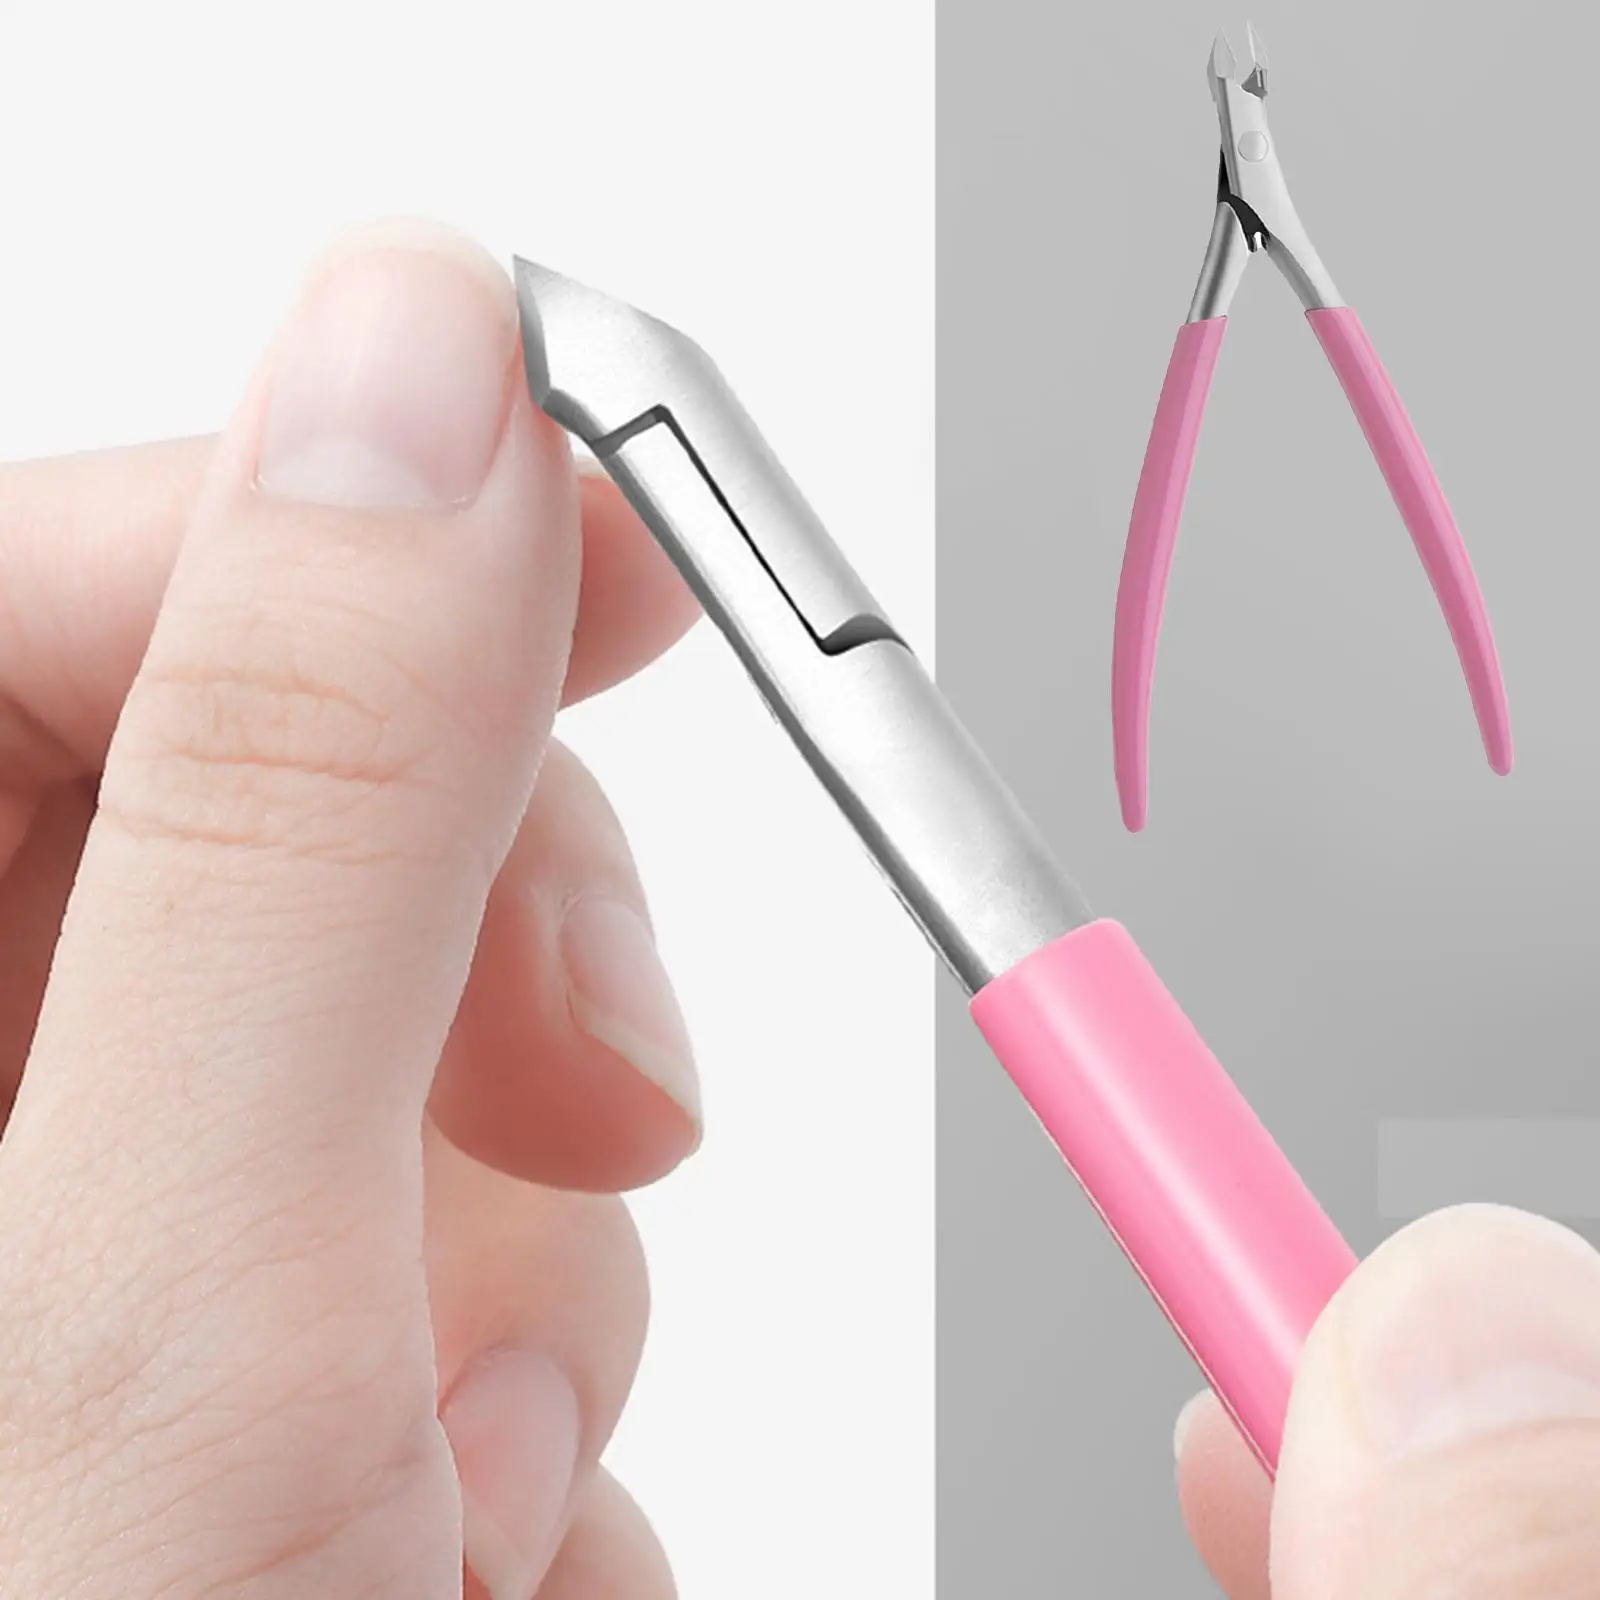 Stainless Steel Cuticle Trimmer Nippers Easy Grip Ingrown Toenail Clippers Pointed 5mm Jaw Callus Remover for Home SPA